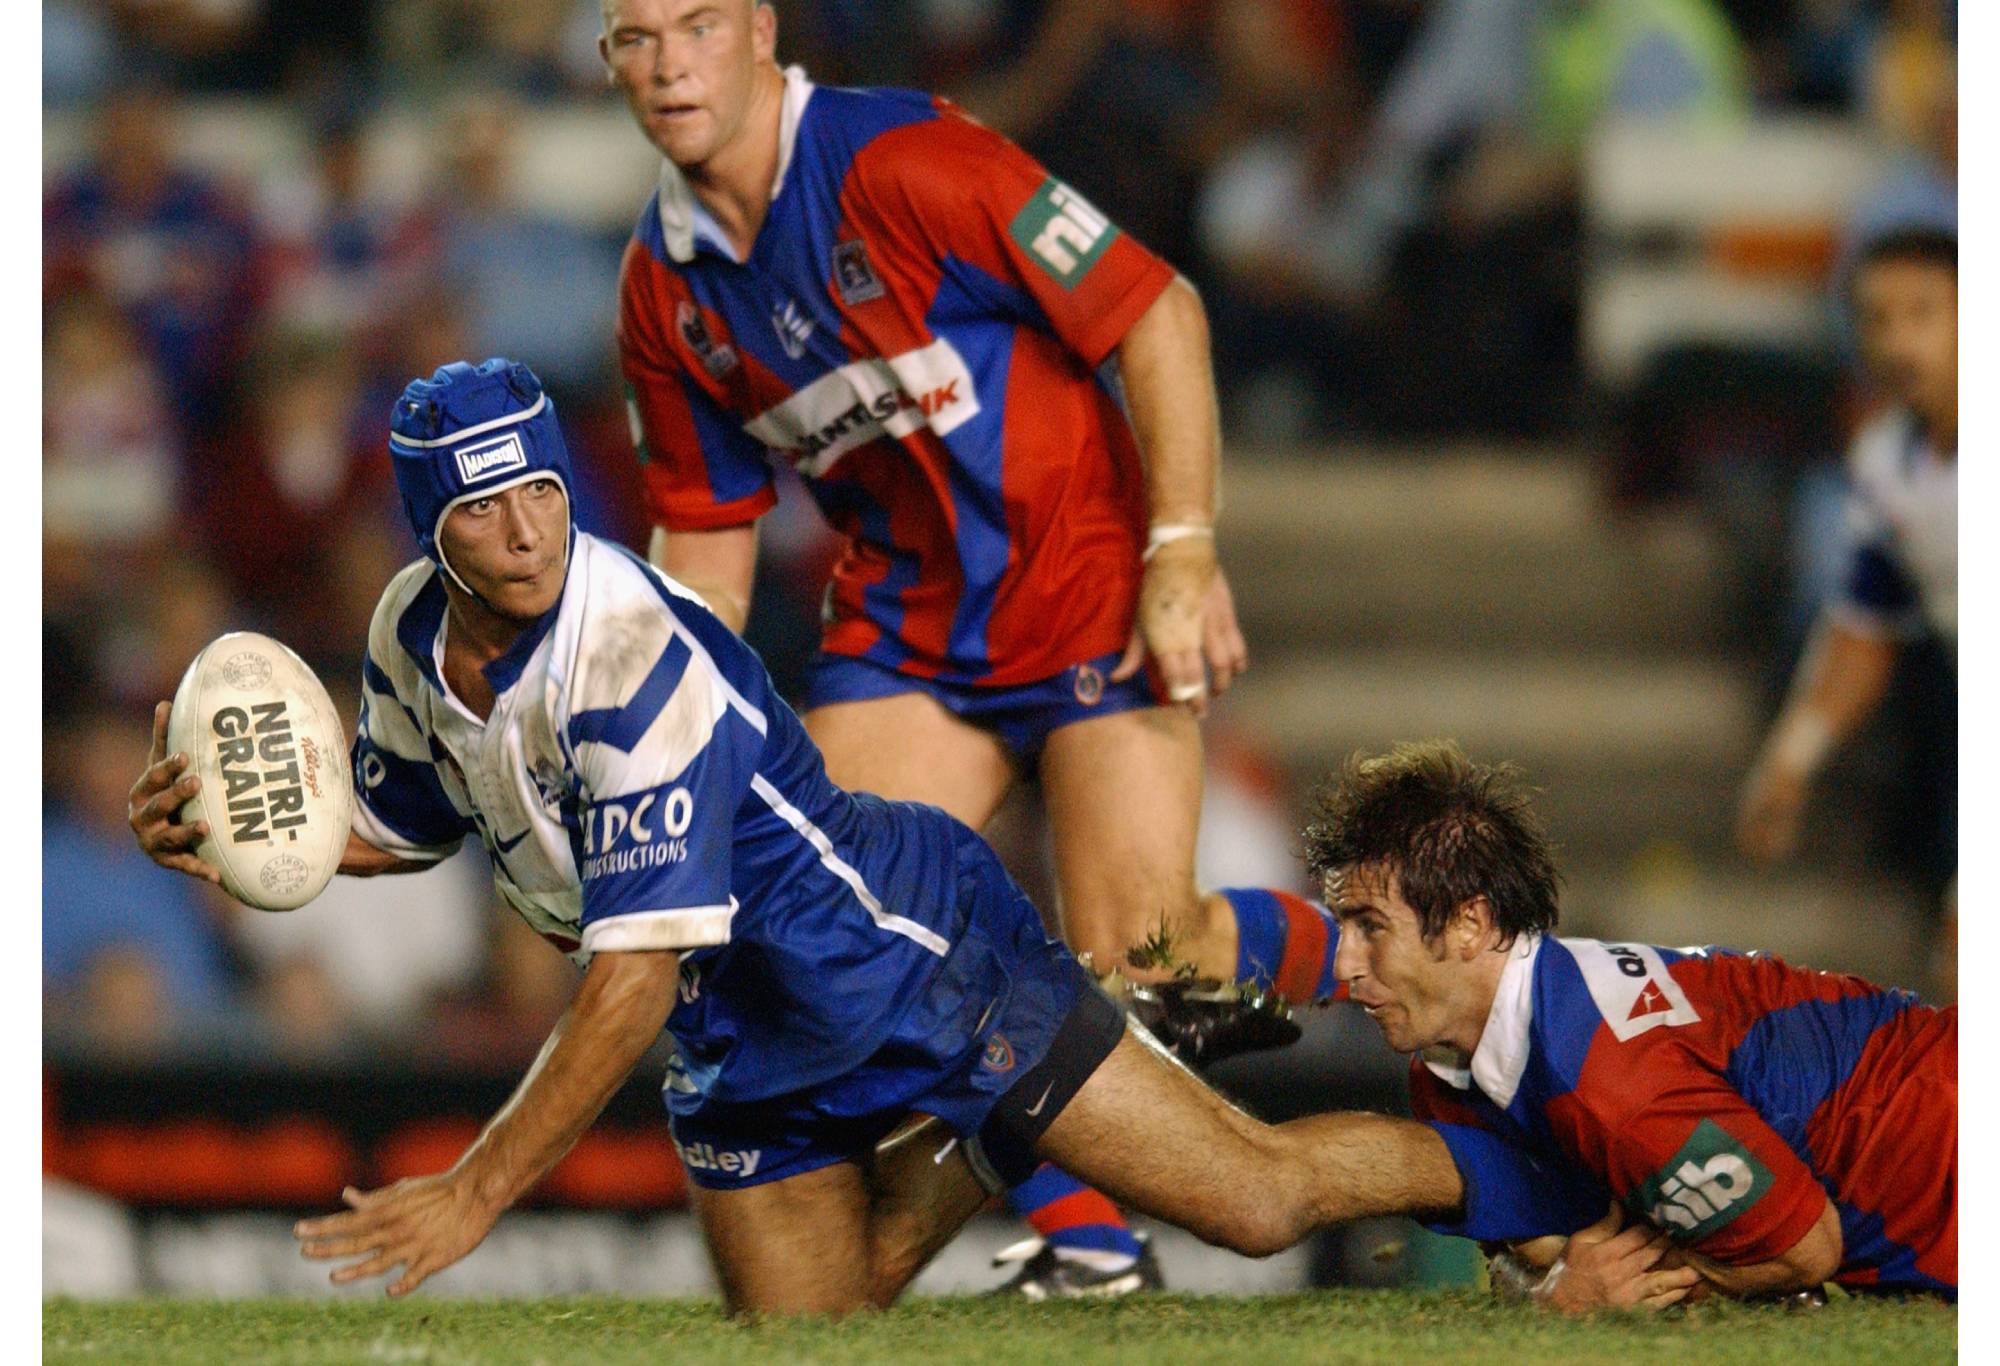 NEWCASTLE - APRIL 11:  Johnathan Thurston #6 of the Bulldogs is tackled by Andrew Johns #7 of the Knights during the round five NRL match between the Newcastle Knights and the Bulldogs held at Energy Australia Stadium in Newcastle, Australia on April 11, 2003. (Photo by Nick Laham/Getty Images)